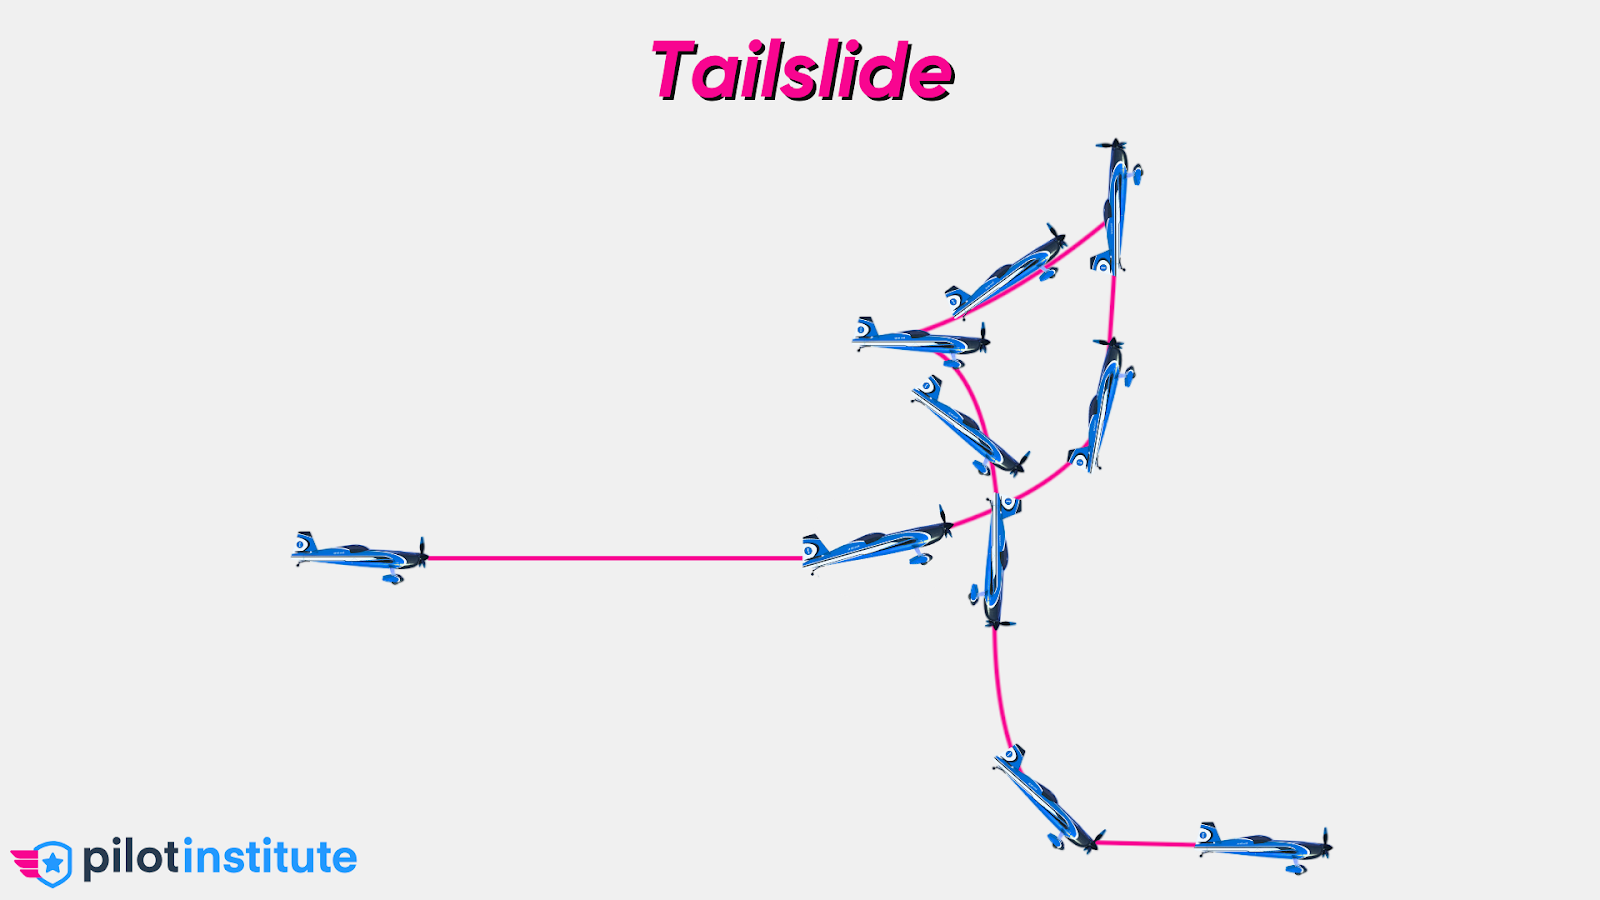 A side view diagram of the tailslide maneuver.